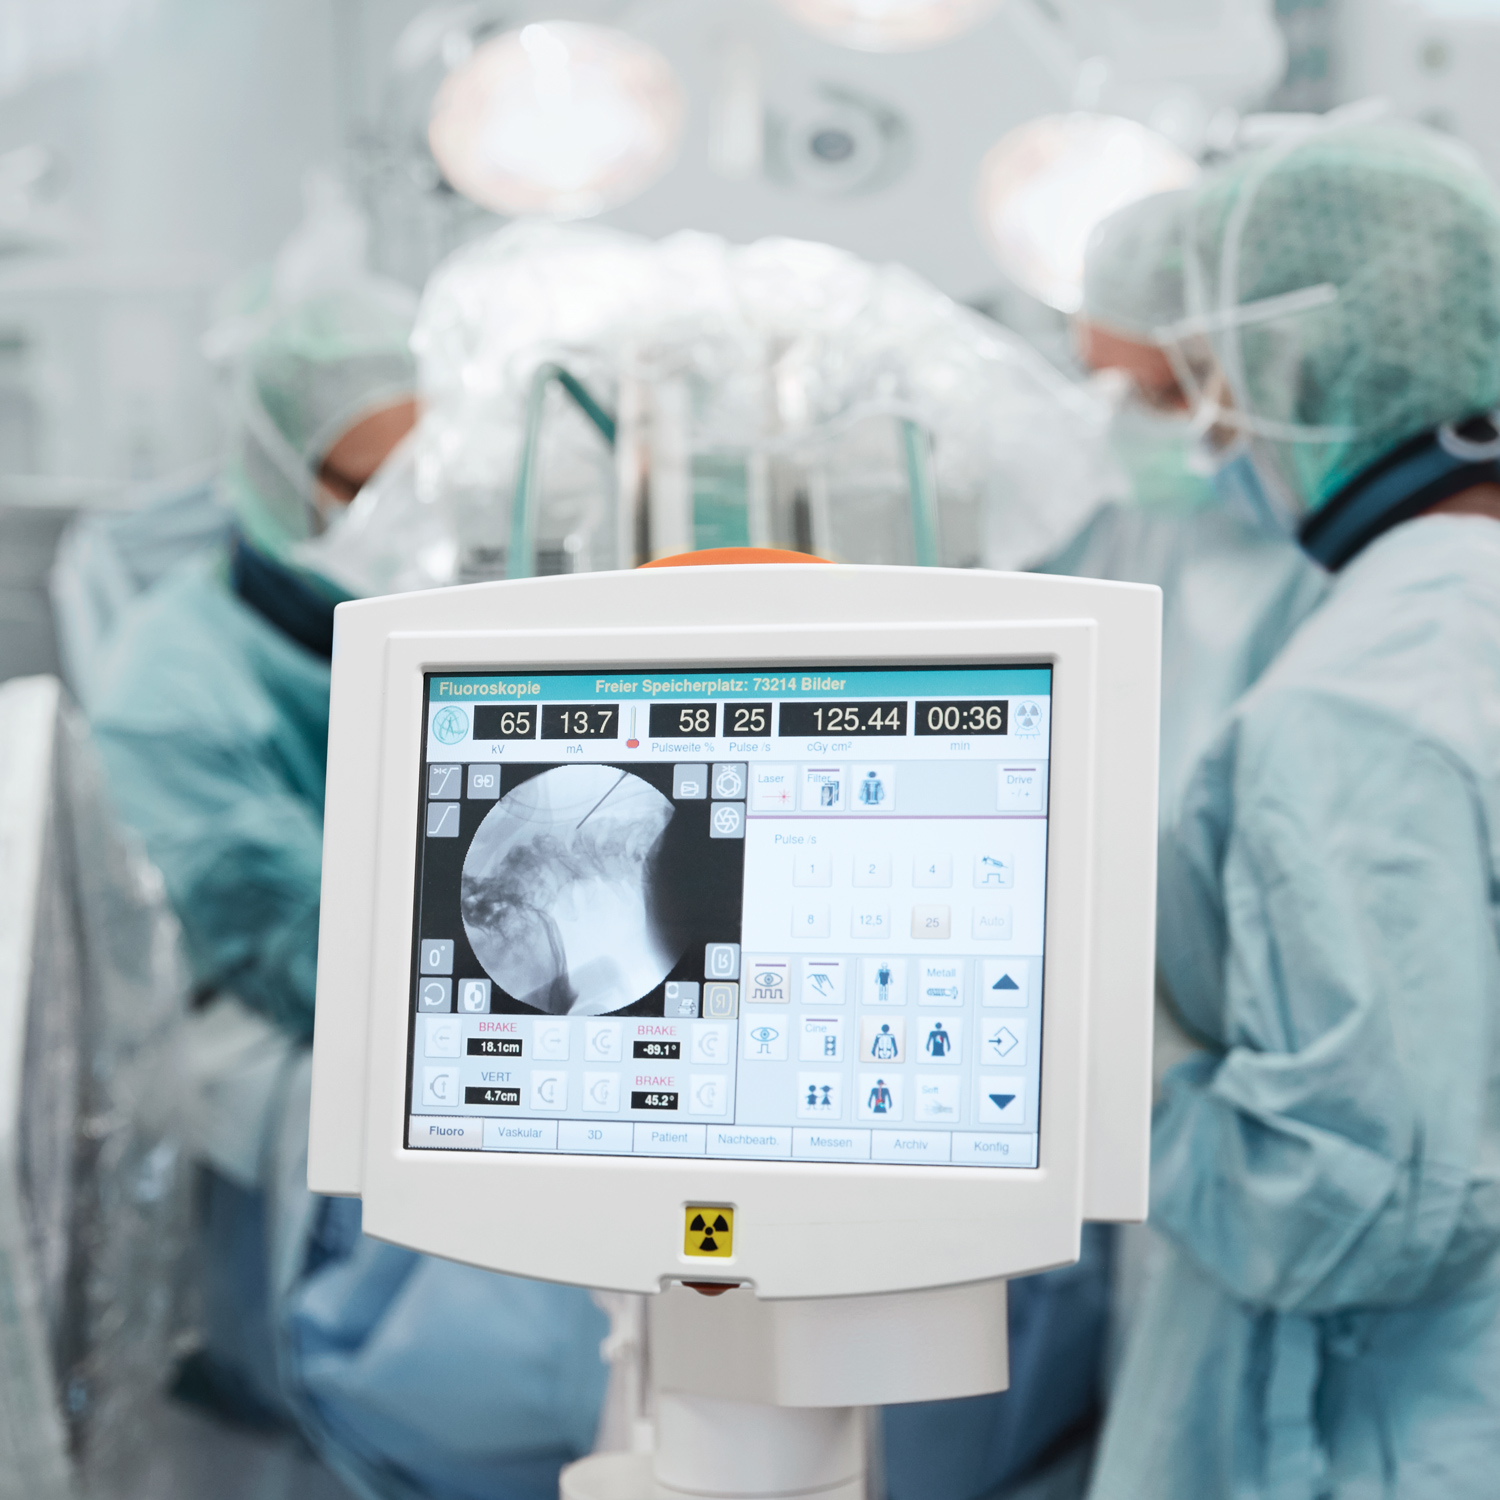 Touchscreen user interface during surgical procedure.